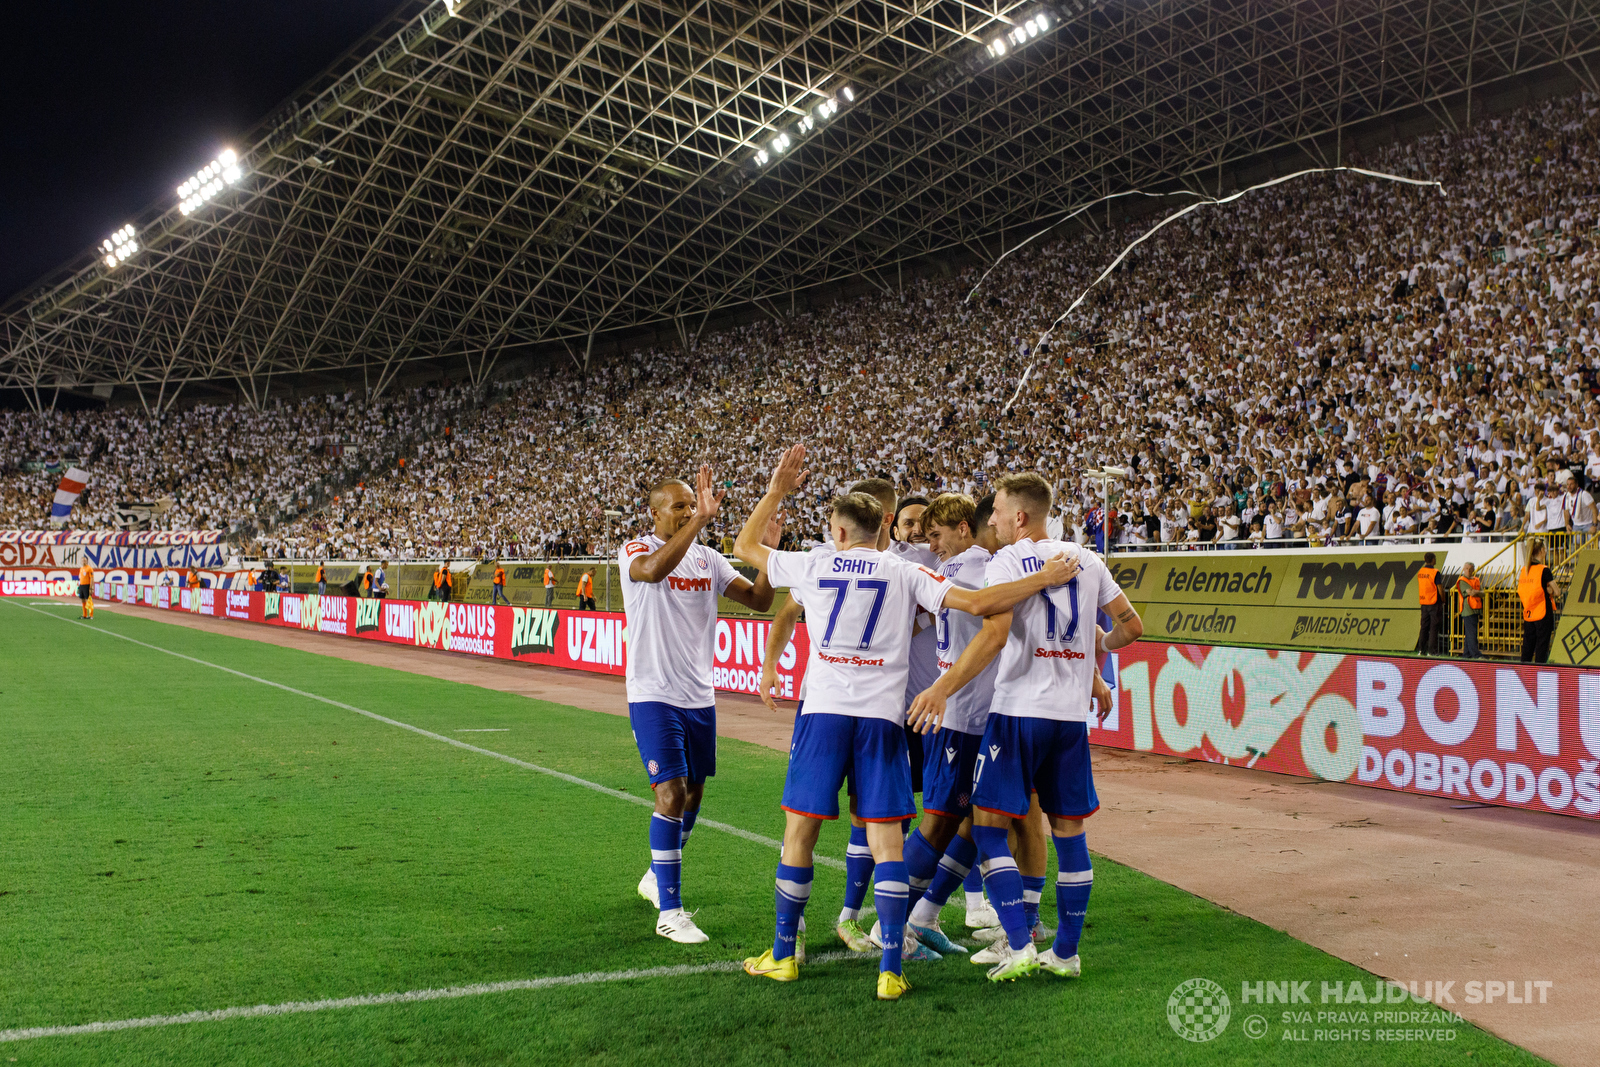 🇭🇷 HAJDUK WIN AGAIN Hajduk Split defeated Rijeka 1-0 at Poljud Sunday  night to make it 6 points from the first two matches of the season.…